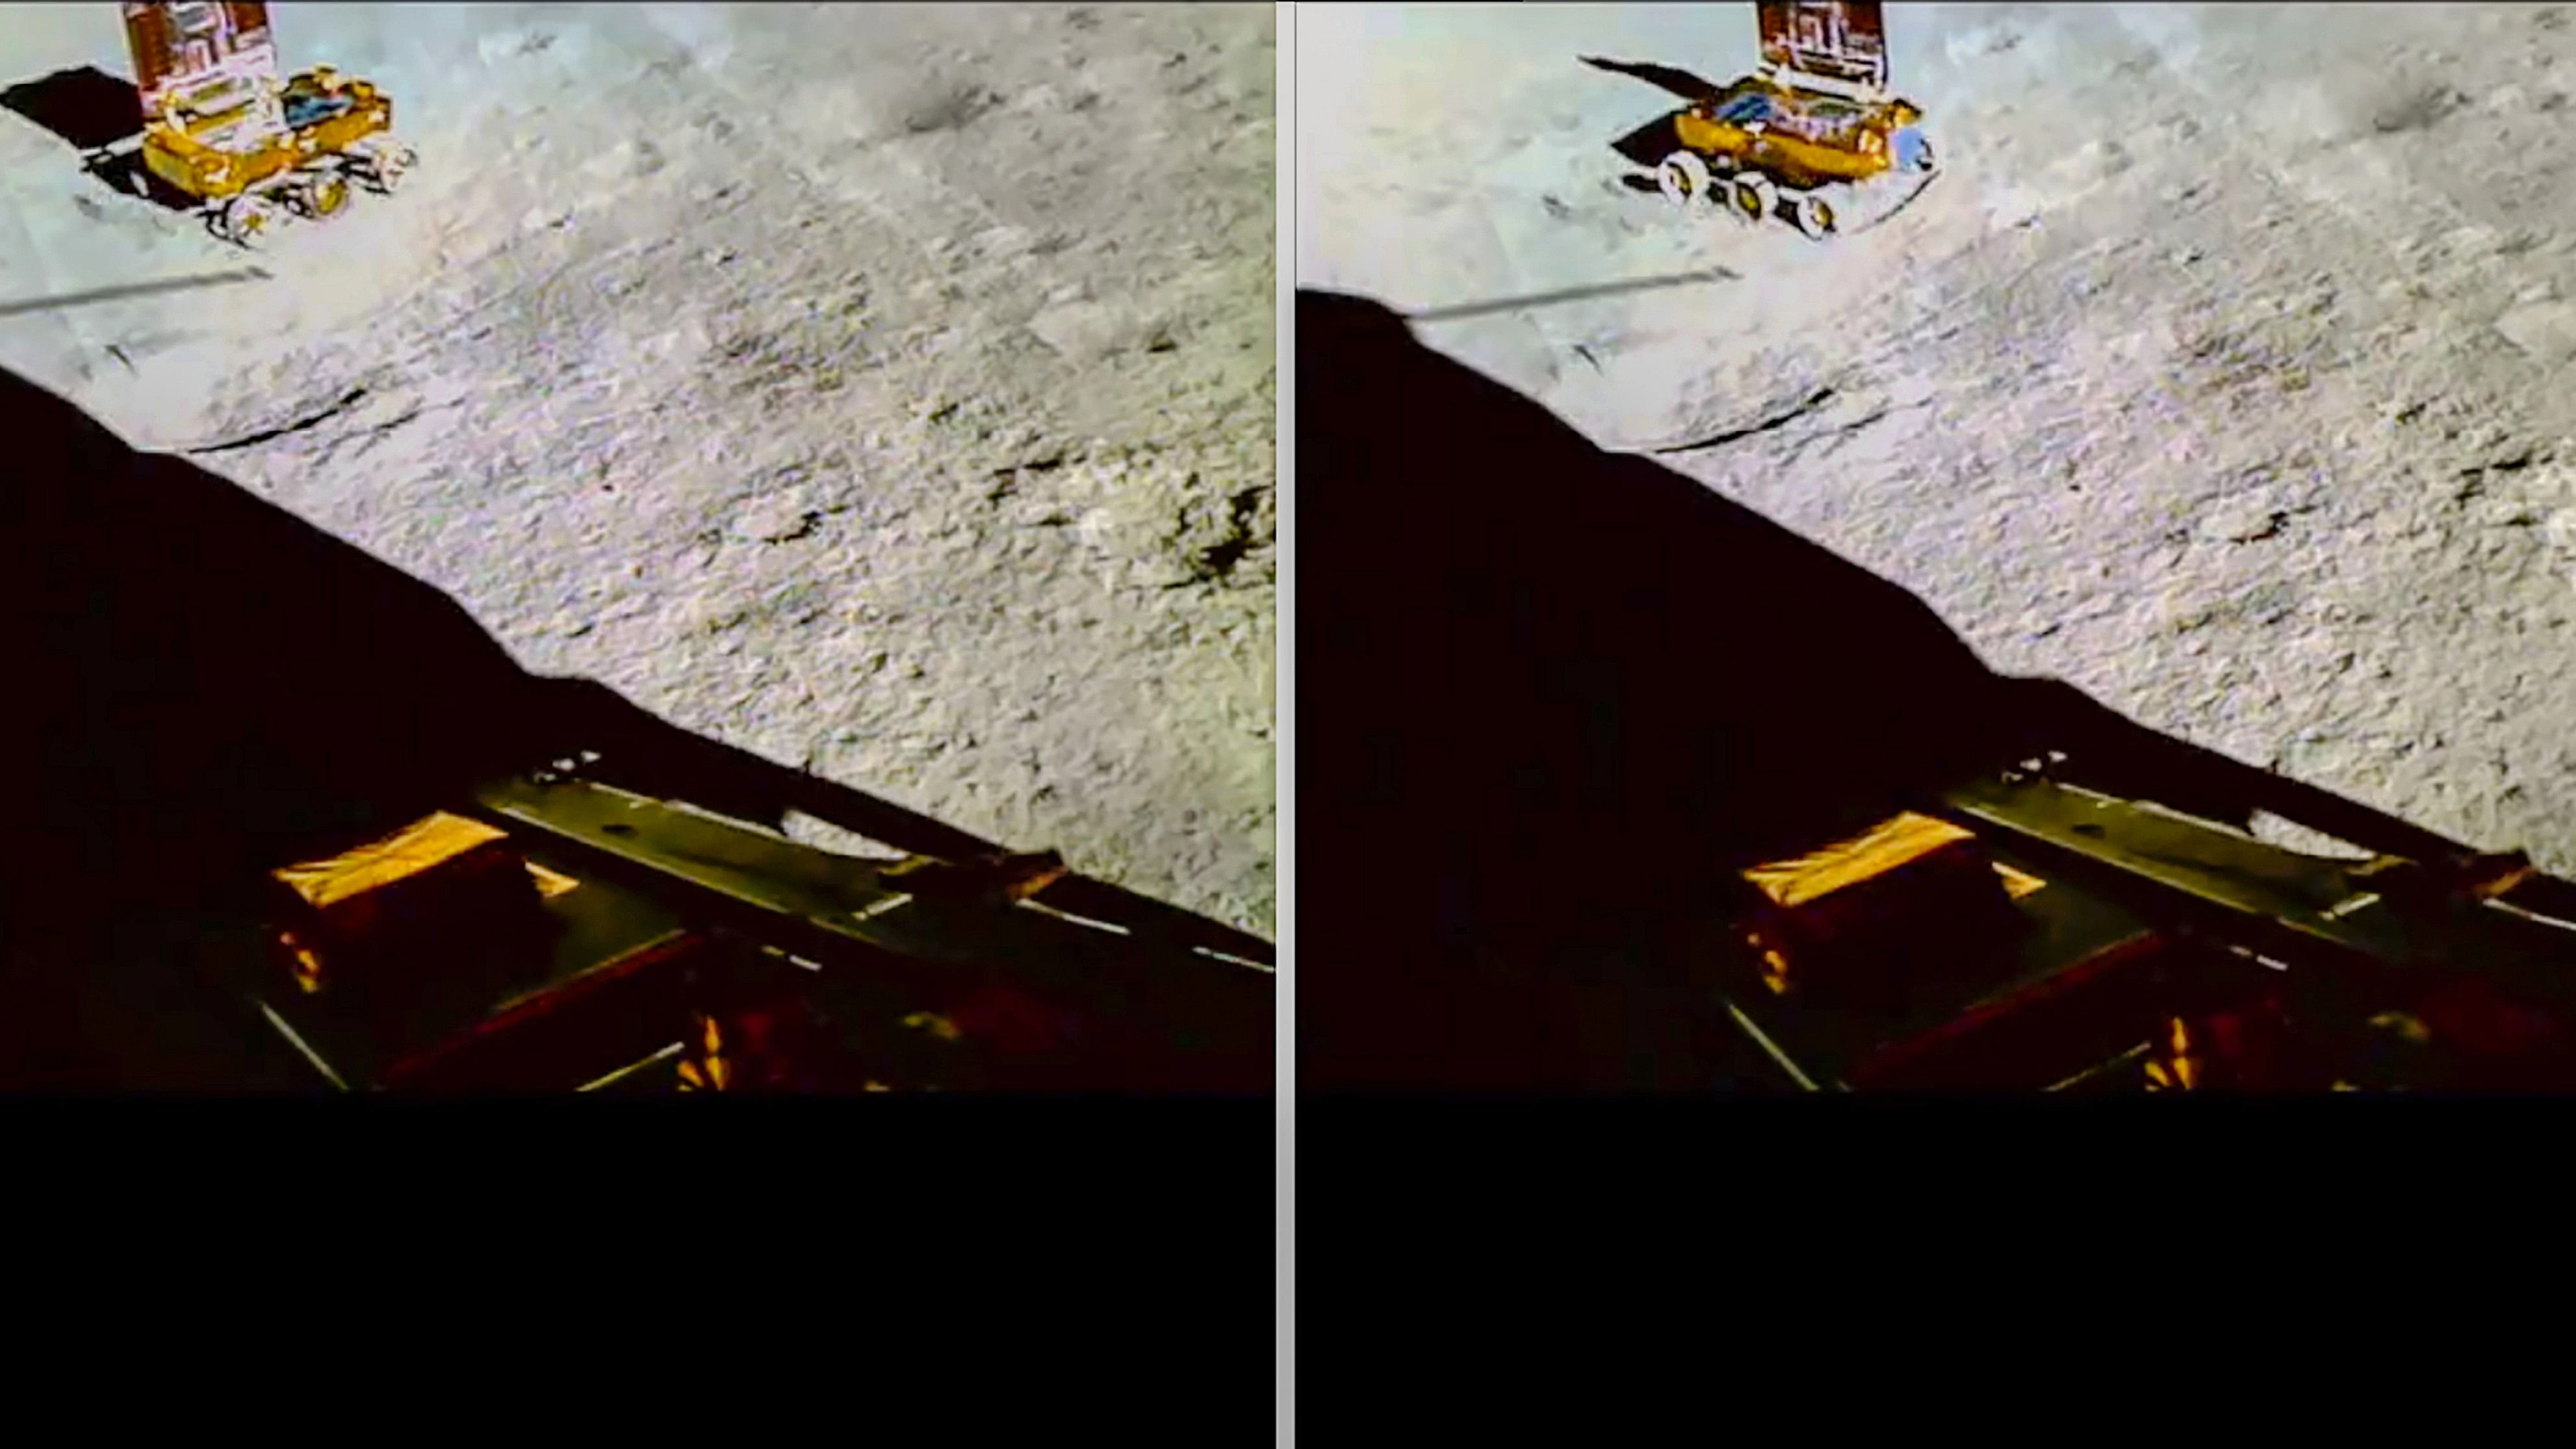 <div class="paragraphs"><p> Pragyan Rovers rotation for a safe route on the surface of the Moon being captured by a Lander Image Camera aboard Vikram Lander as part of ISROs Chandrayaan-3 lunar mission. </p></div>